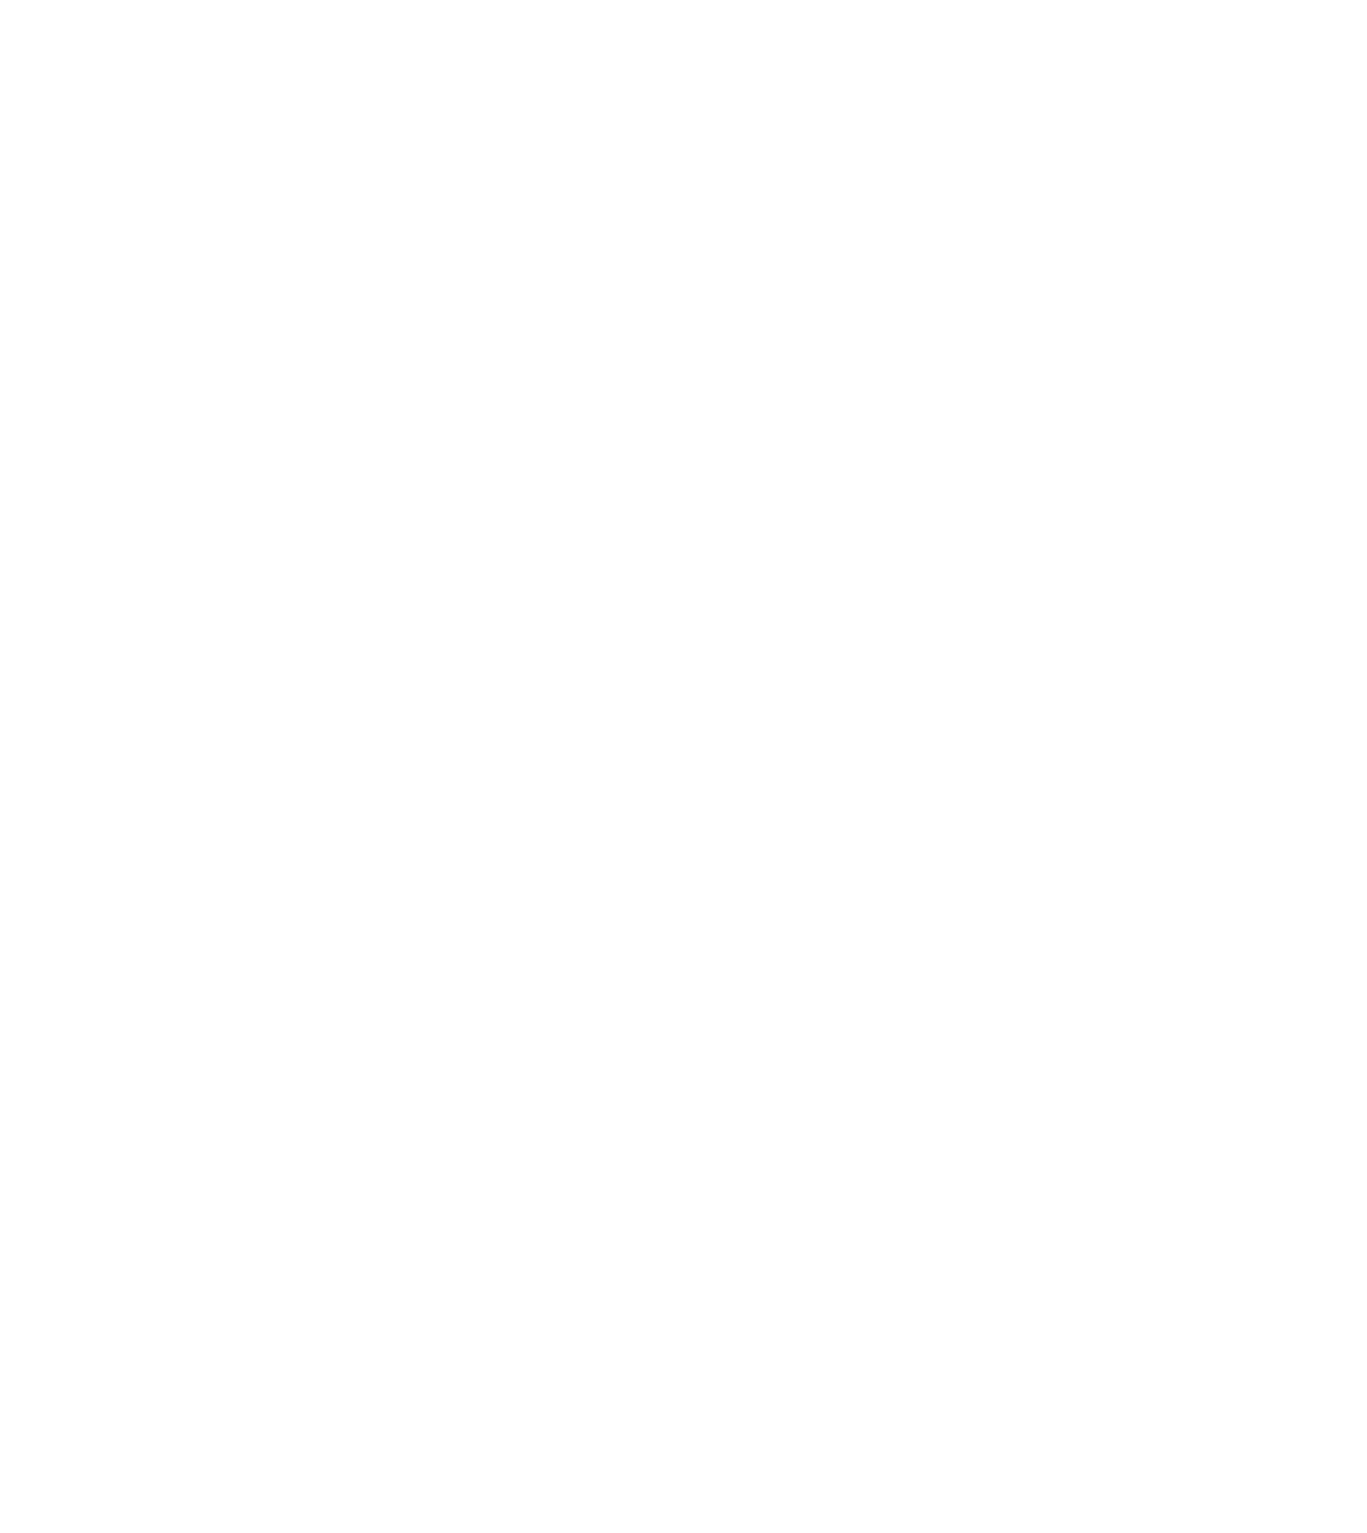 Vicinity Centres logo large for dark backgrounds (transparent PNG)